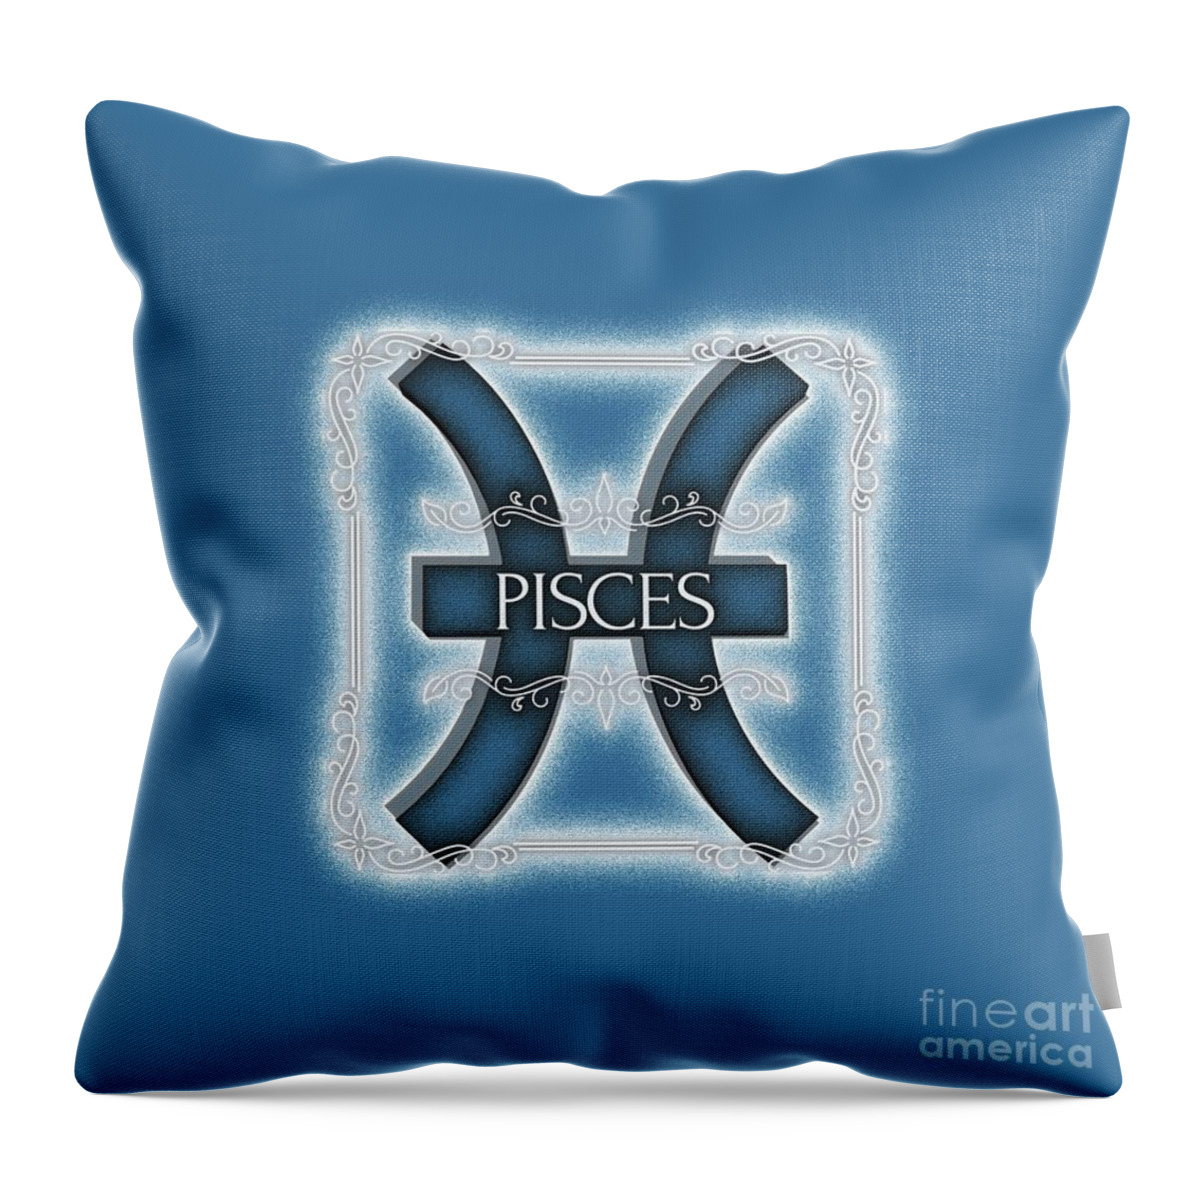 Zodiac Throw Pillow featuring the digital art Pisces by Esoterica Art Agency